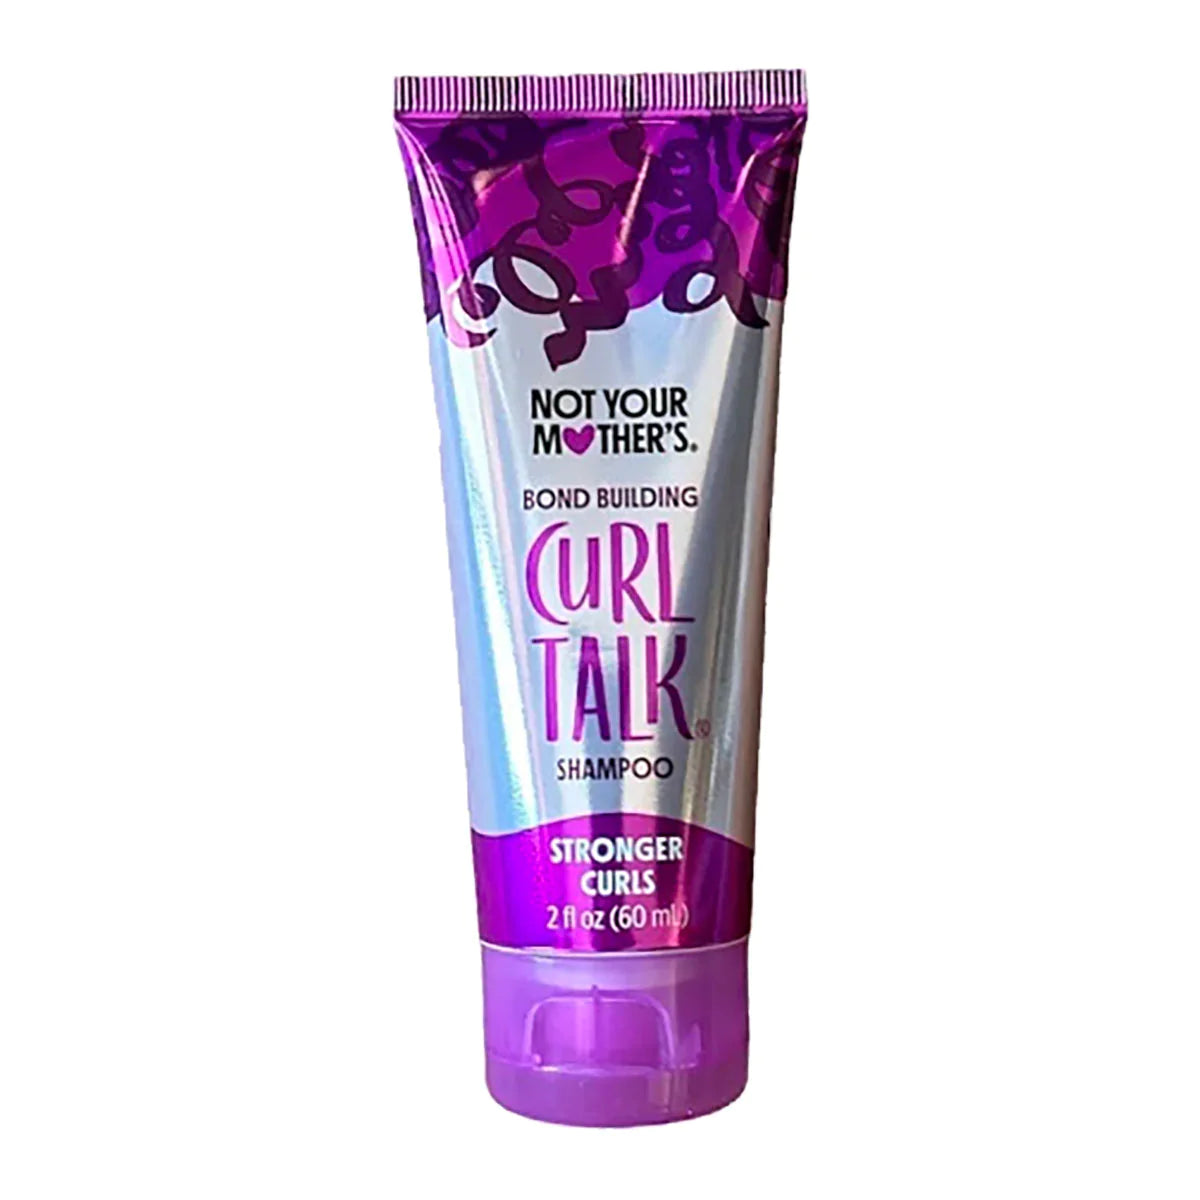 Not Your Mother's Curl Talk Bond Building Conditioner - 60 ml